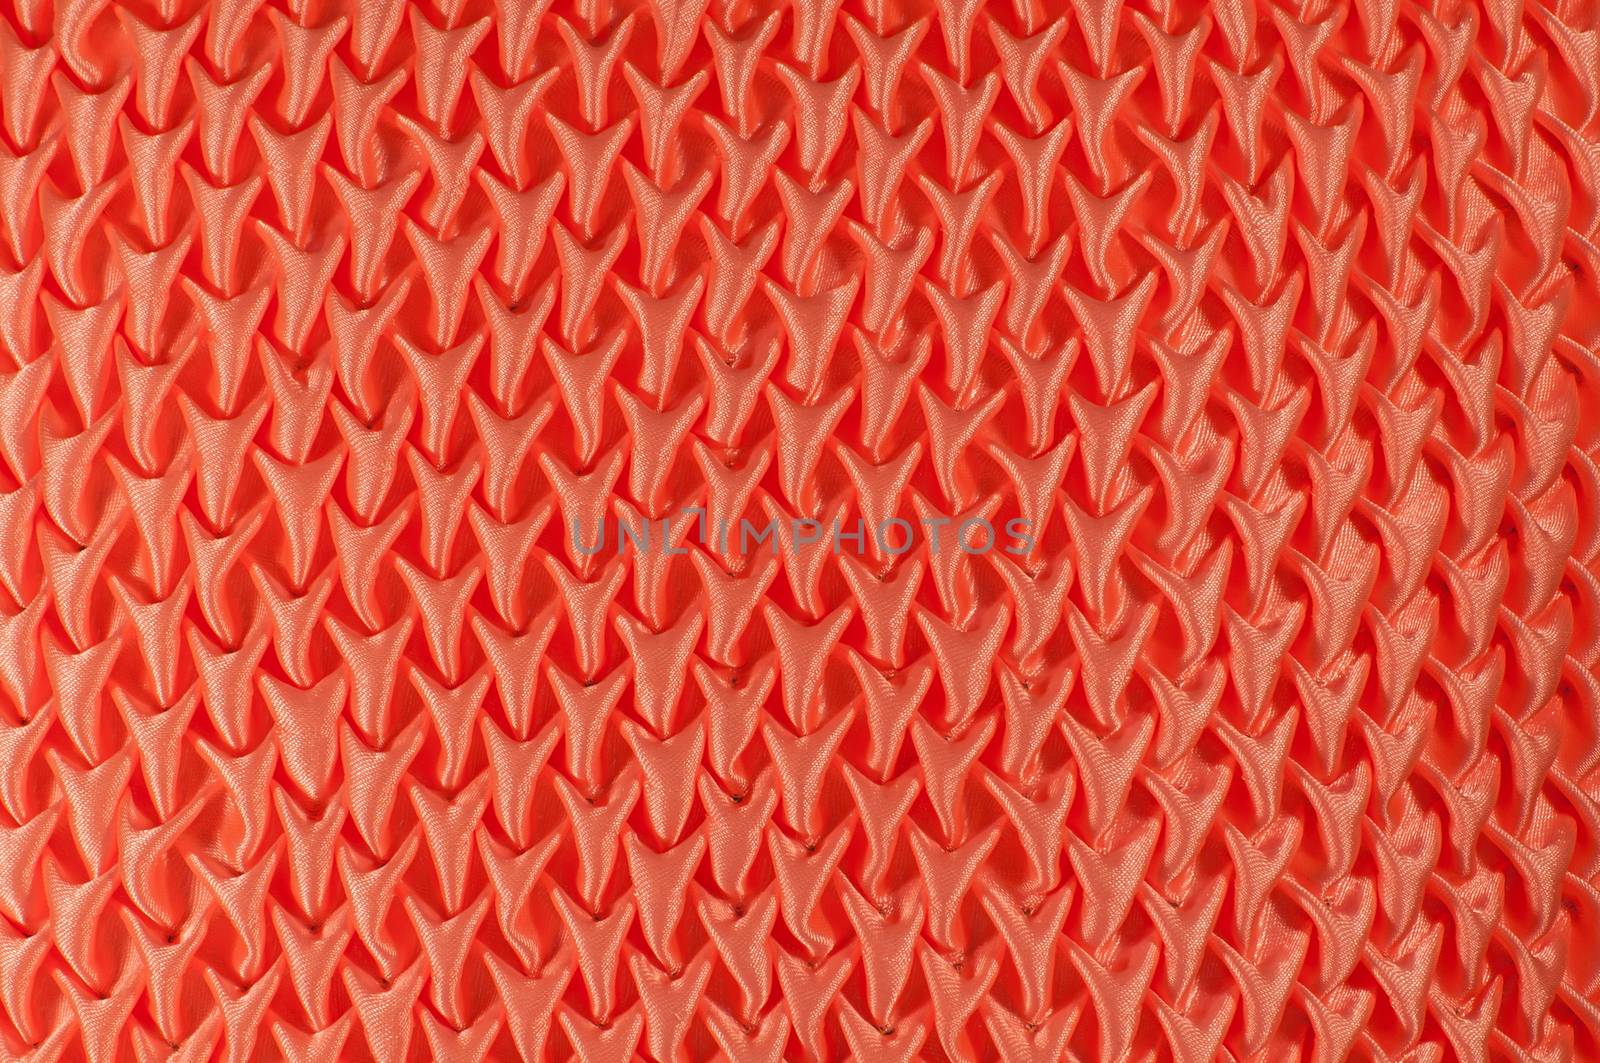 Pattern embroidered orange pillow and texture background